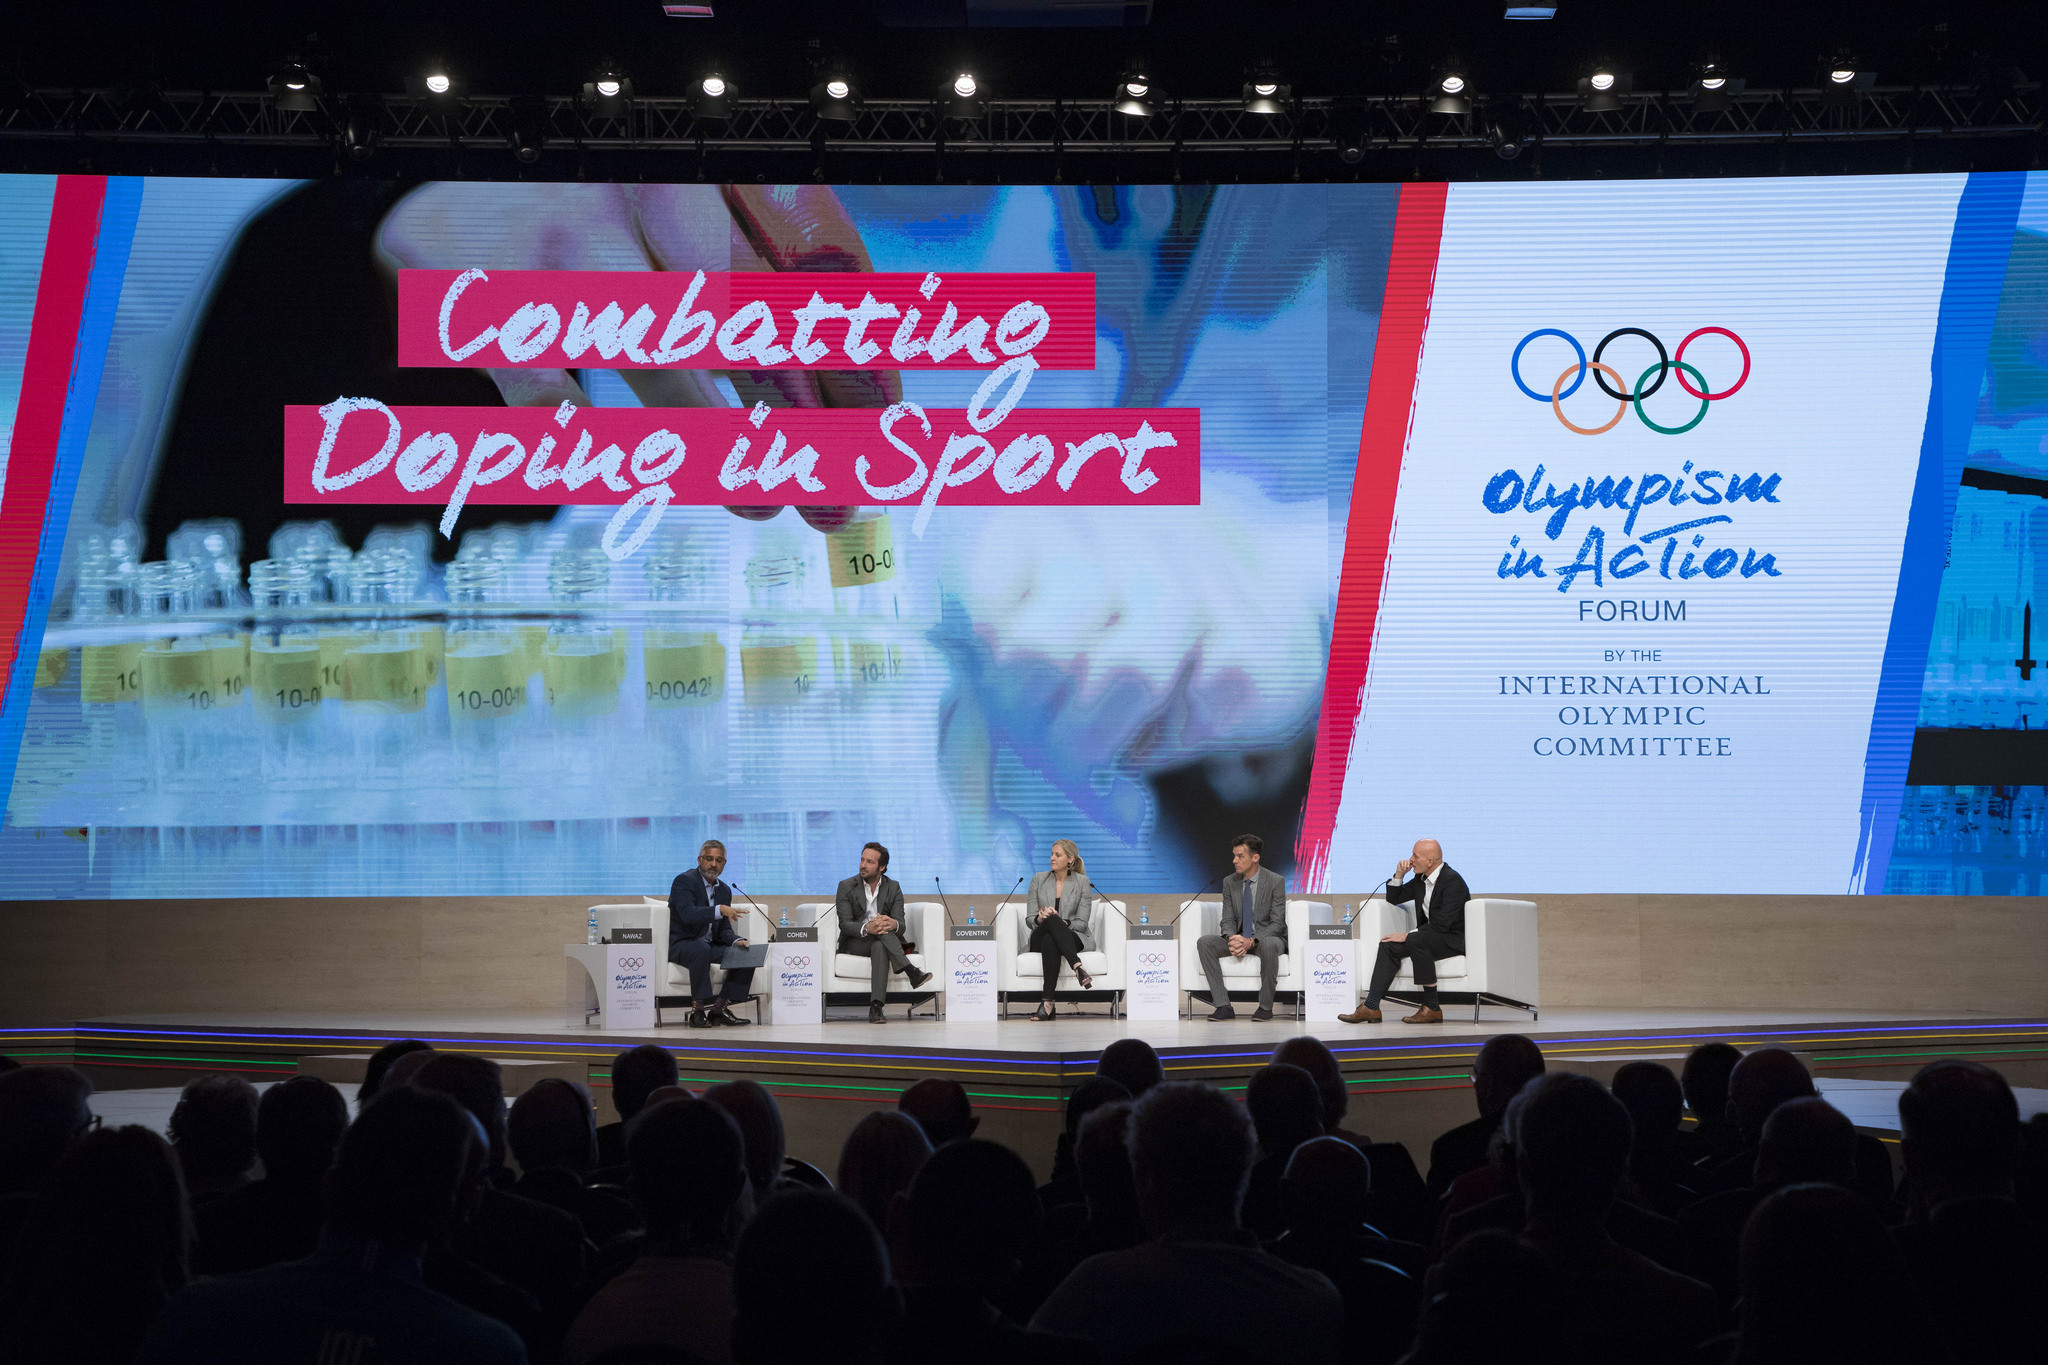 A panel discussion on doping in sport was among the highlights of the opening day ©IOC